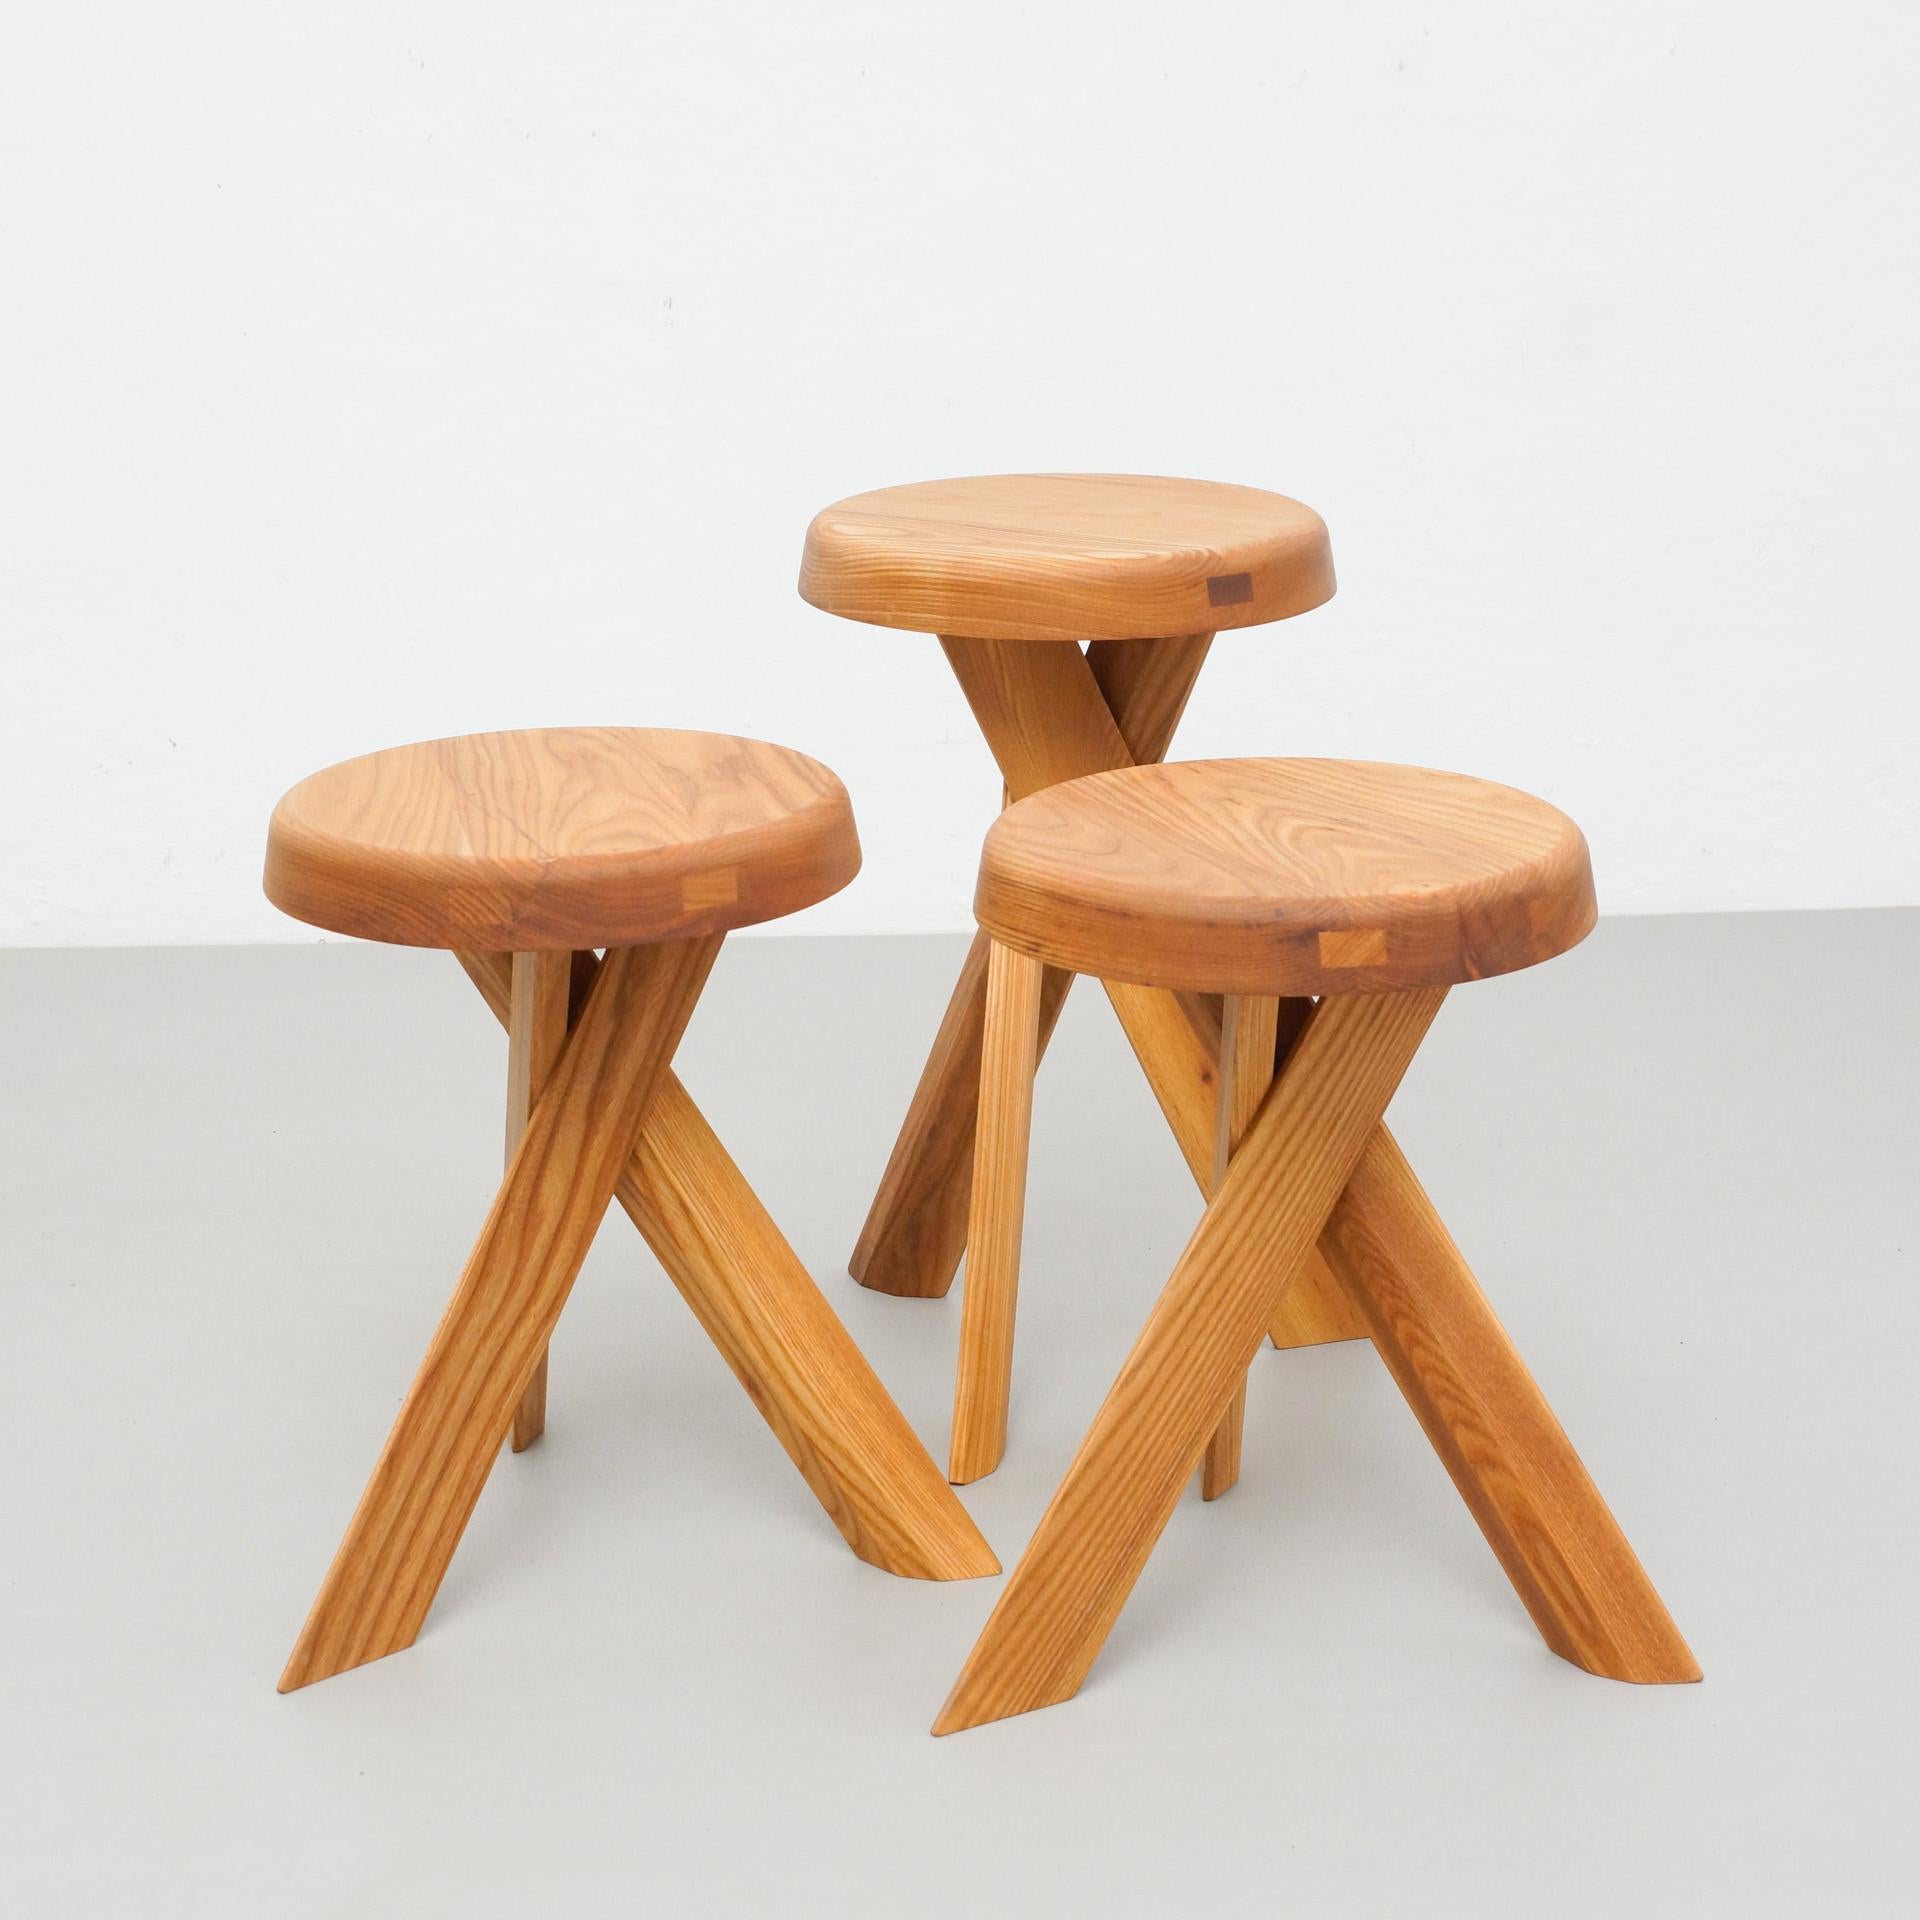 S31A and S31B stools designed by Pierre Chapo, circa 1960.
Manufactured by Chapo Creation in France, 2020.
Solid elmwood.

Measures: 33 cm x 45 cm / 33 cm x 55 cm 

In good original condition, with minor wear consistent with age and use,